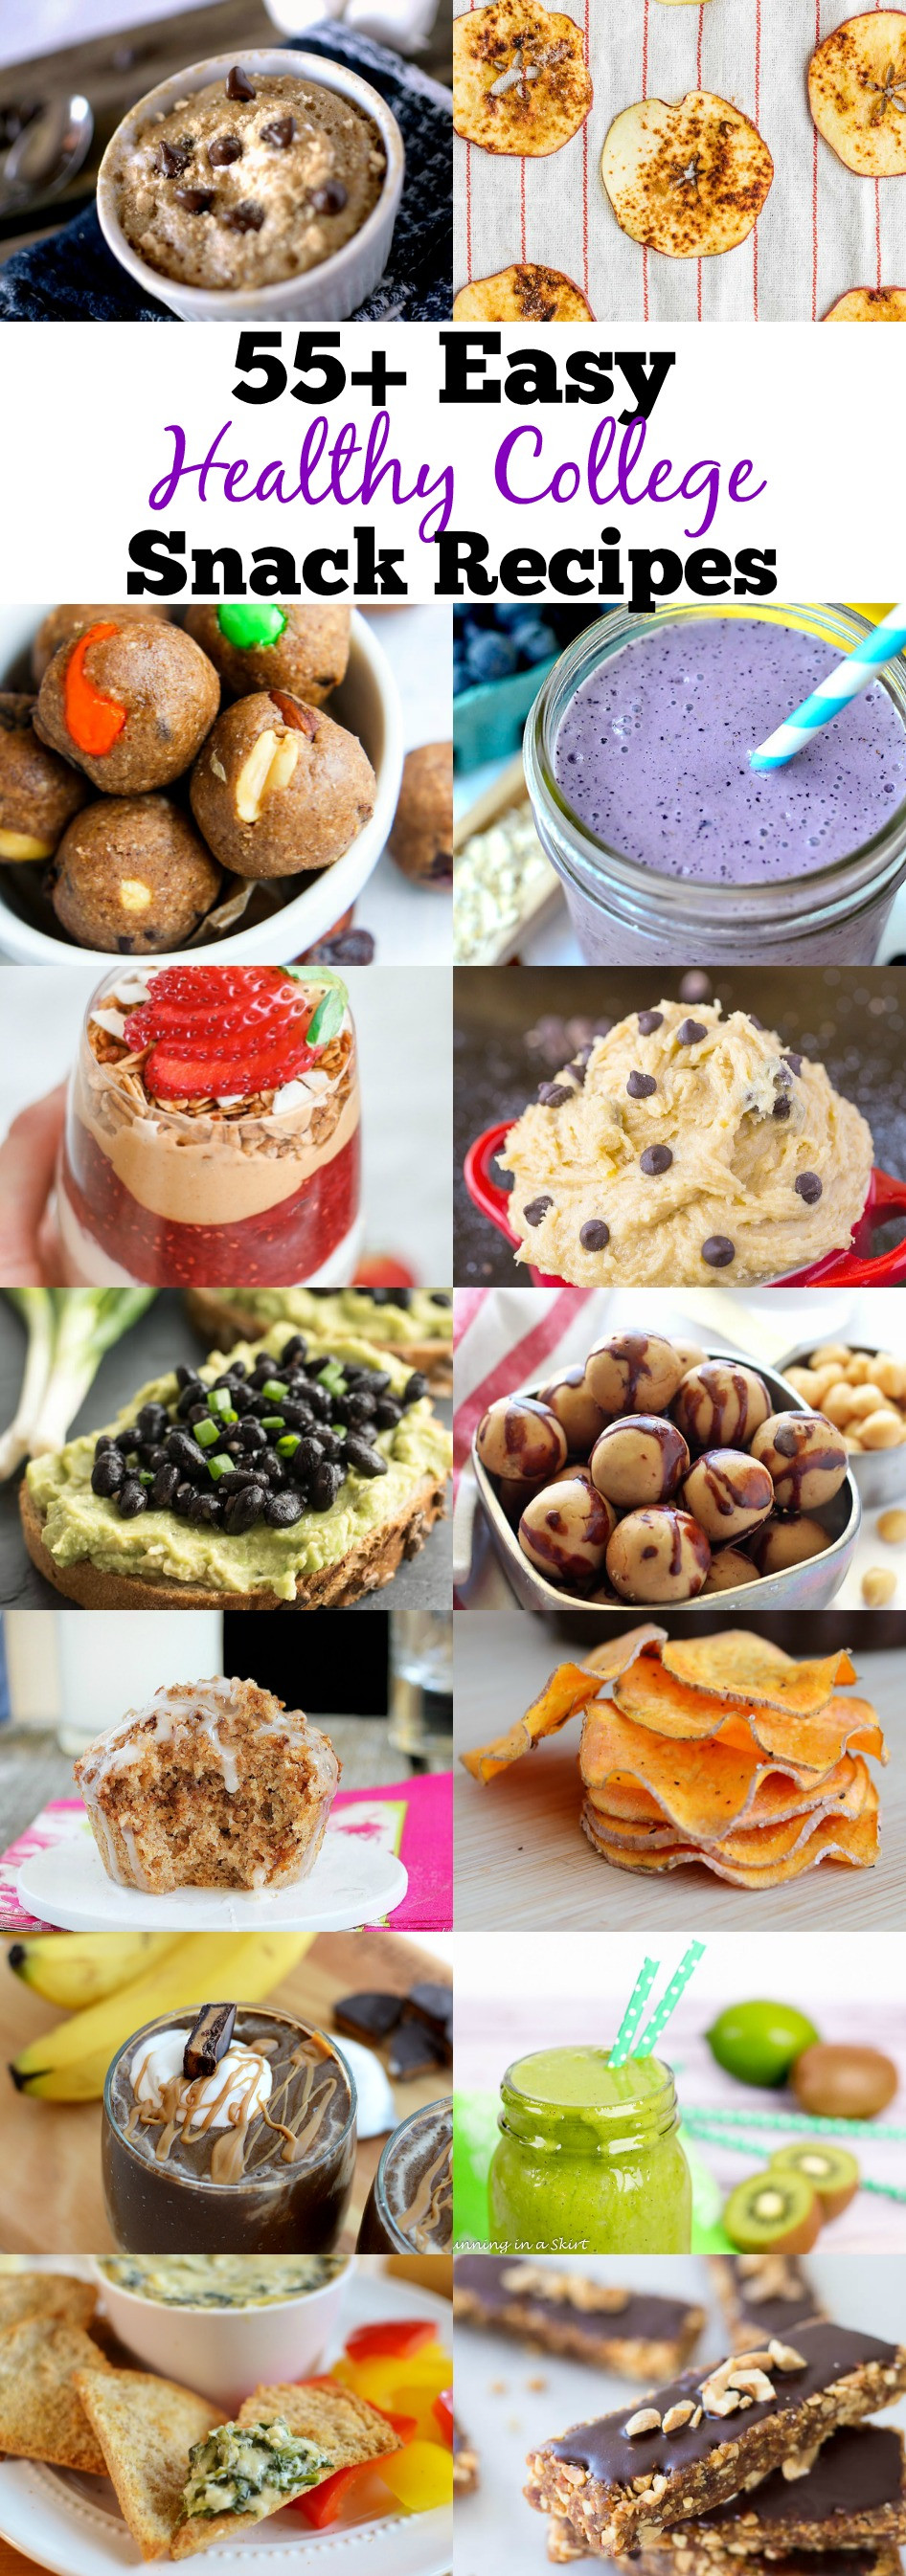 Healthy College Dinners
 55 Healthy College Snack Recipes That Can Be Made In a